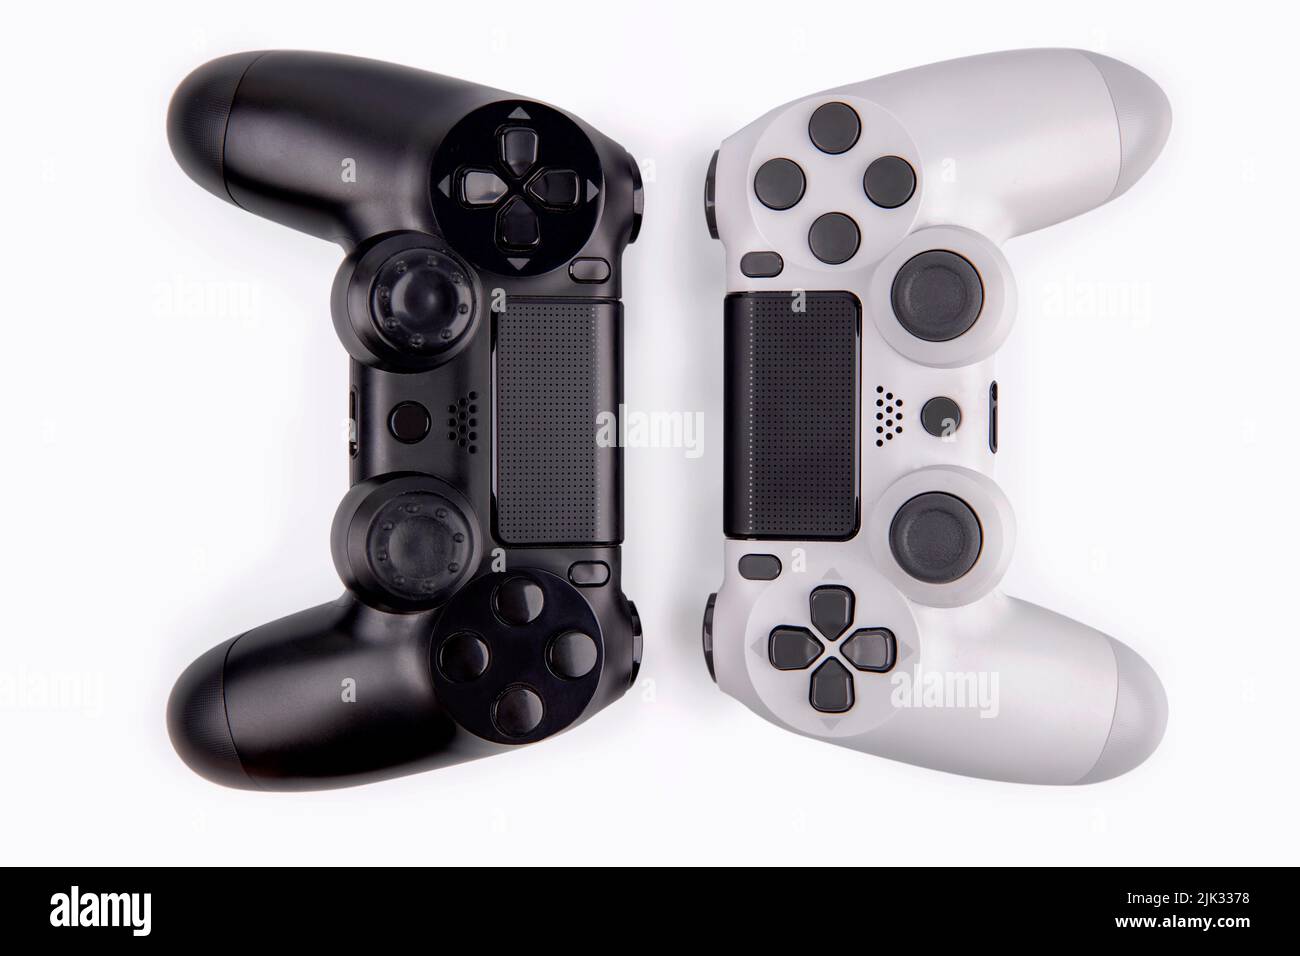 Joystick gaming controller isolated on white background , Video game console developed Interactive Entertainment Stock Photo